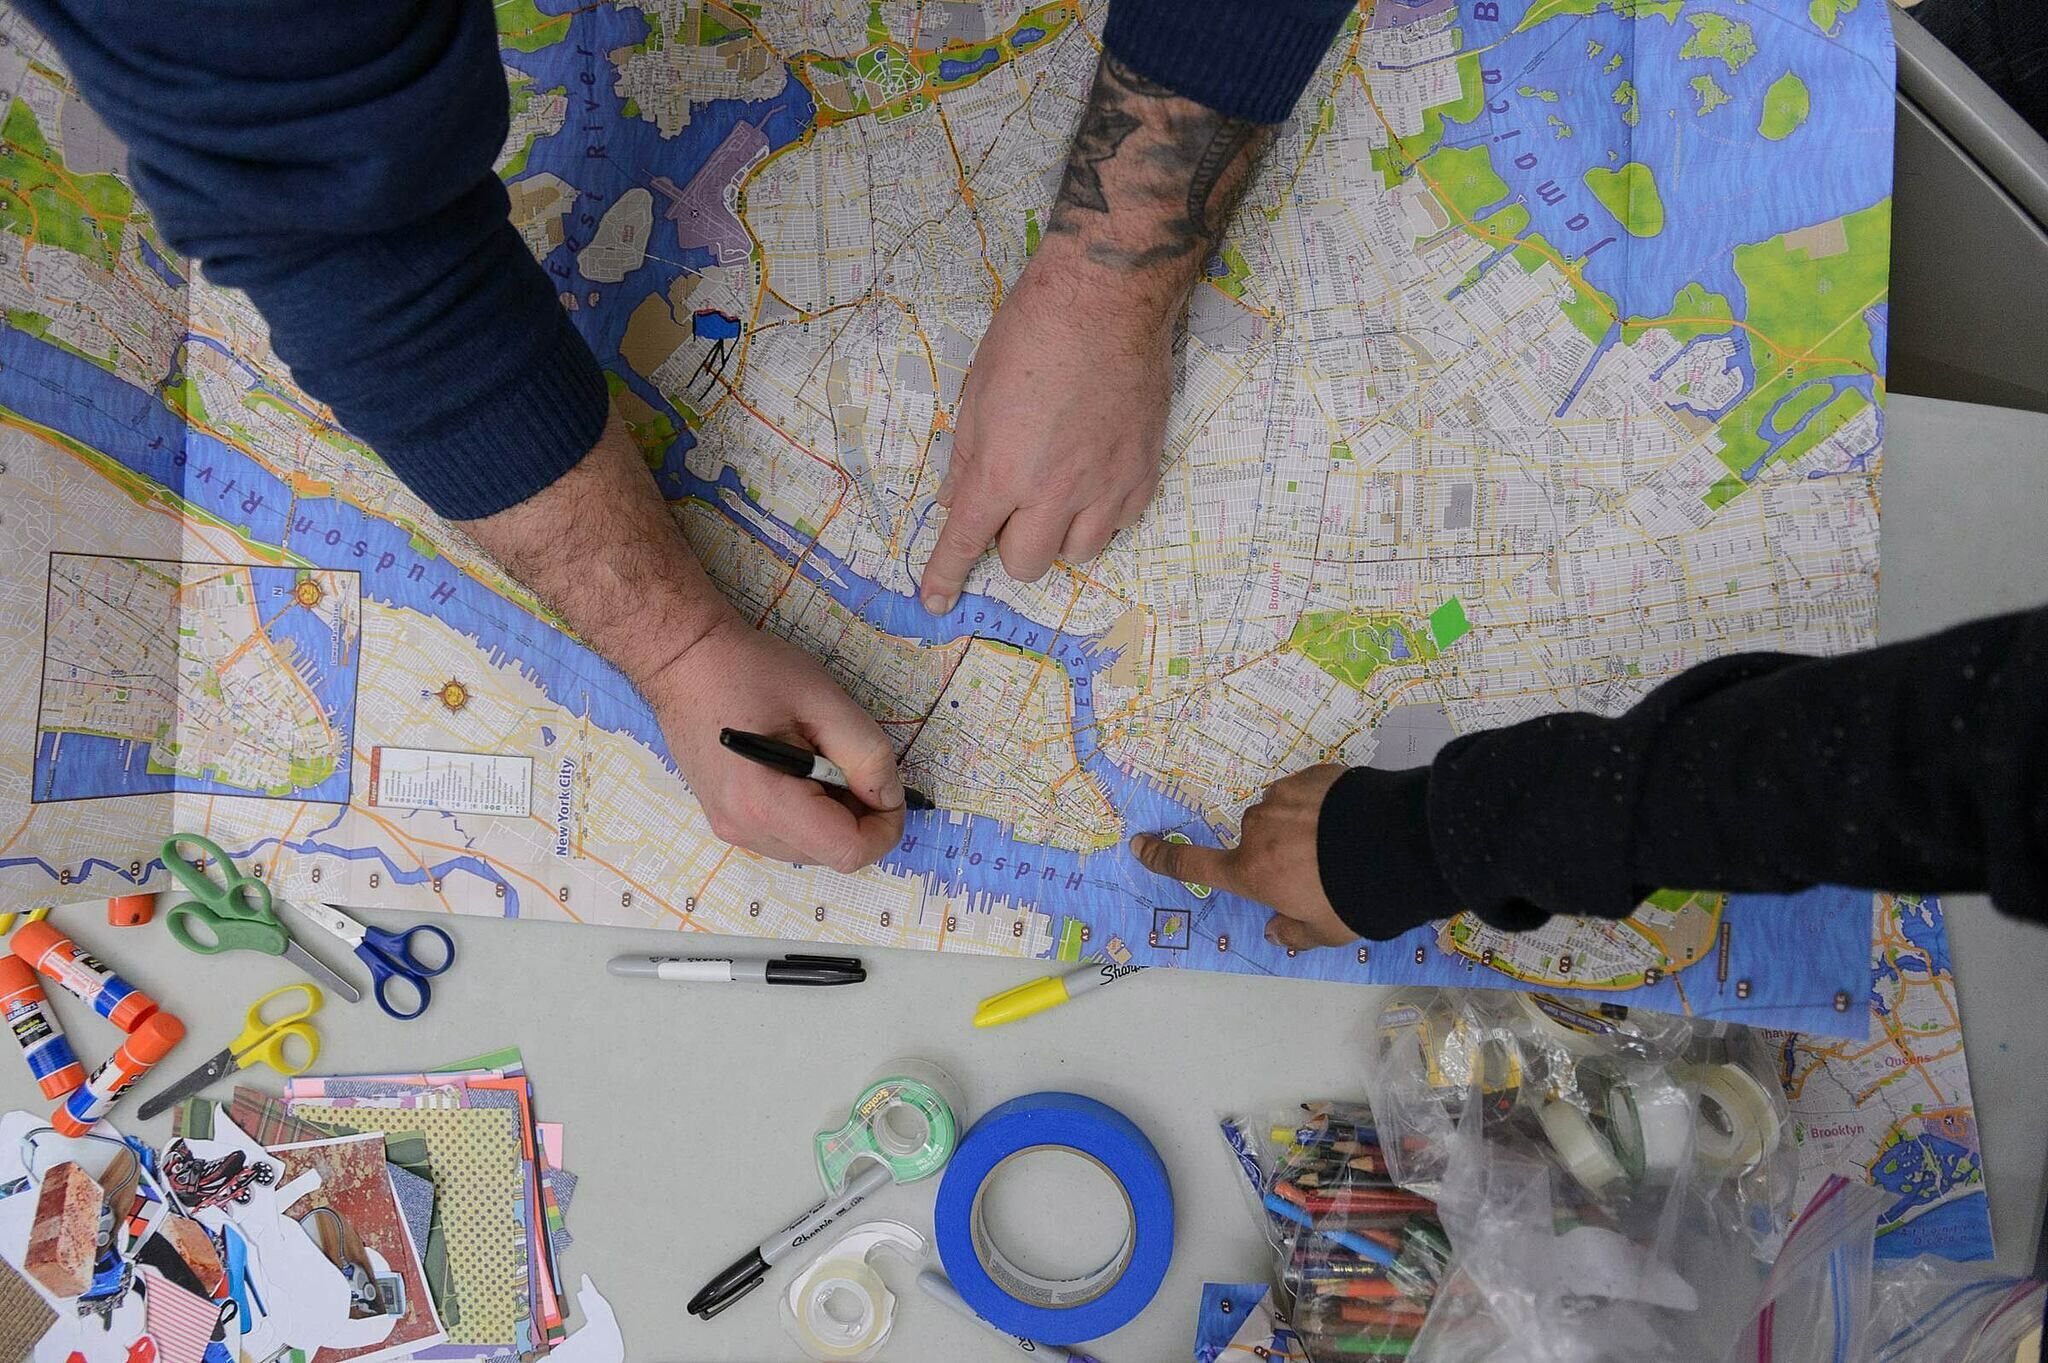 People drawing on a map with markers, with scissors, tape, and other materials on a table.